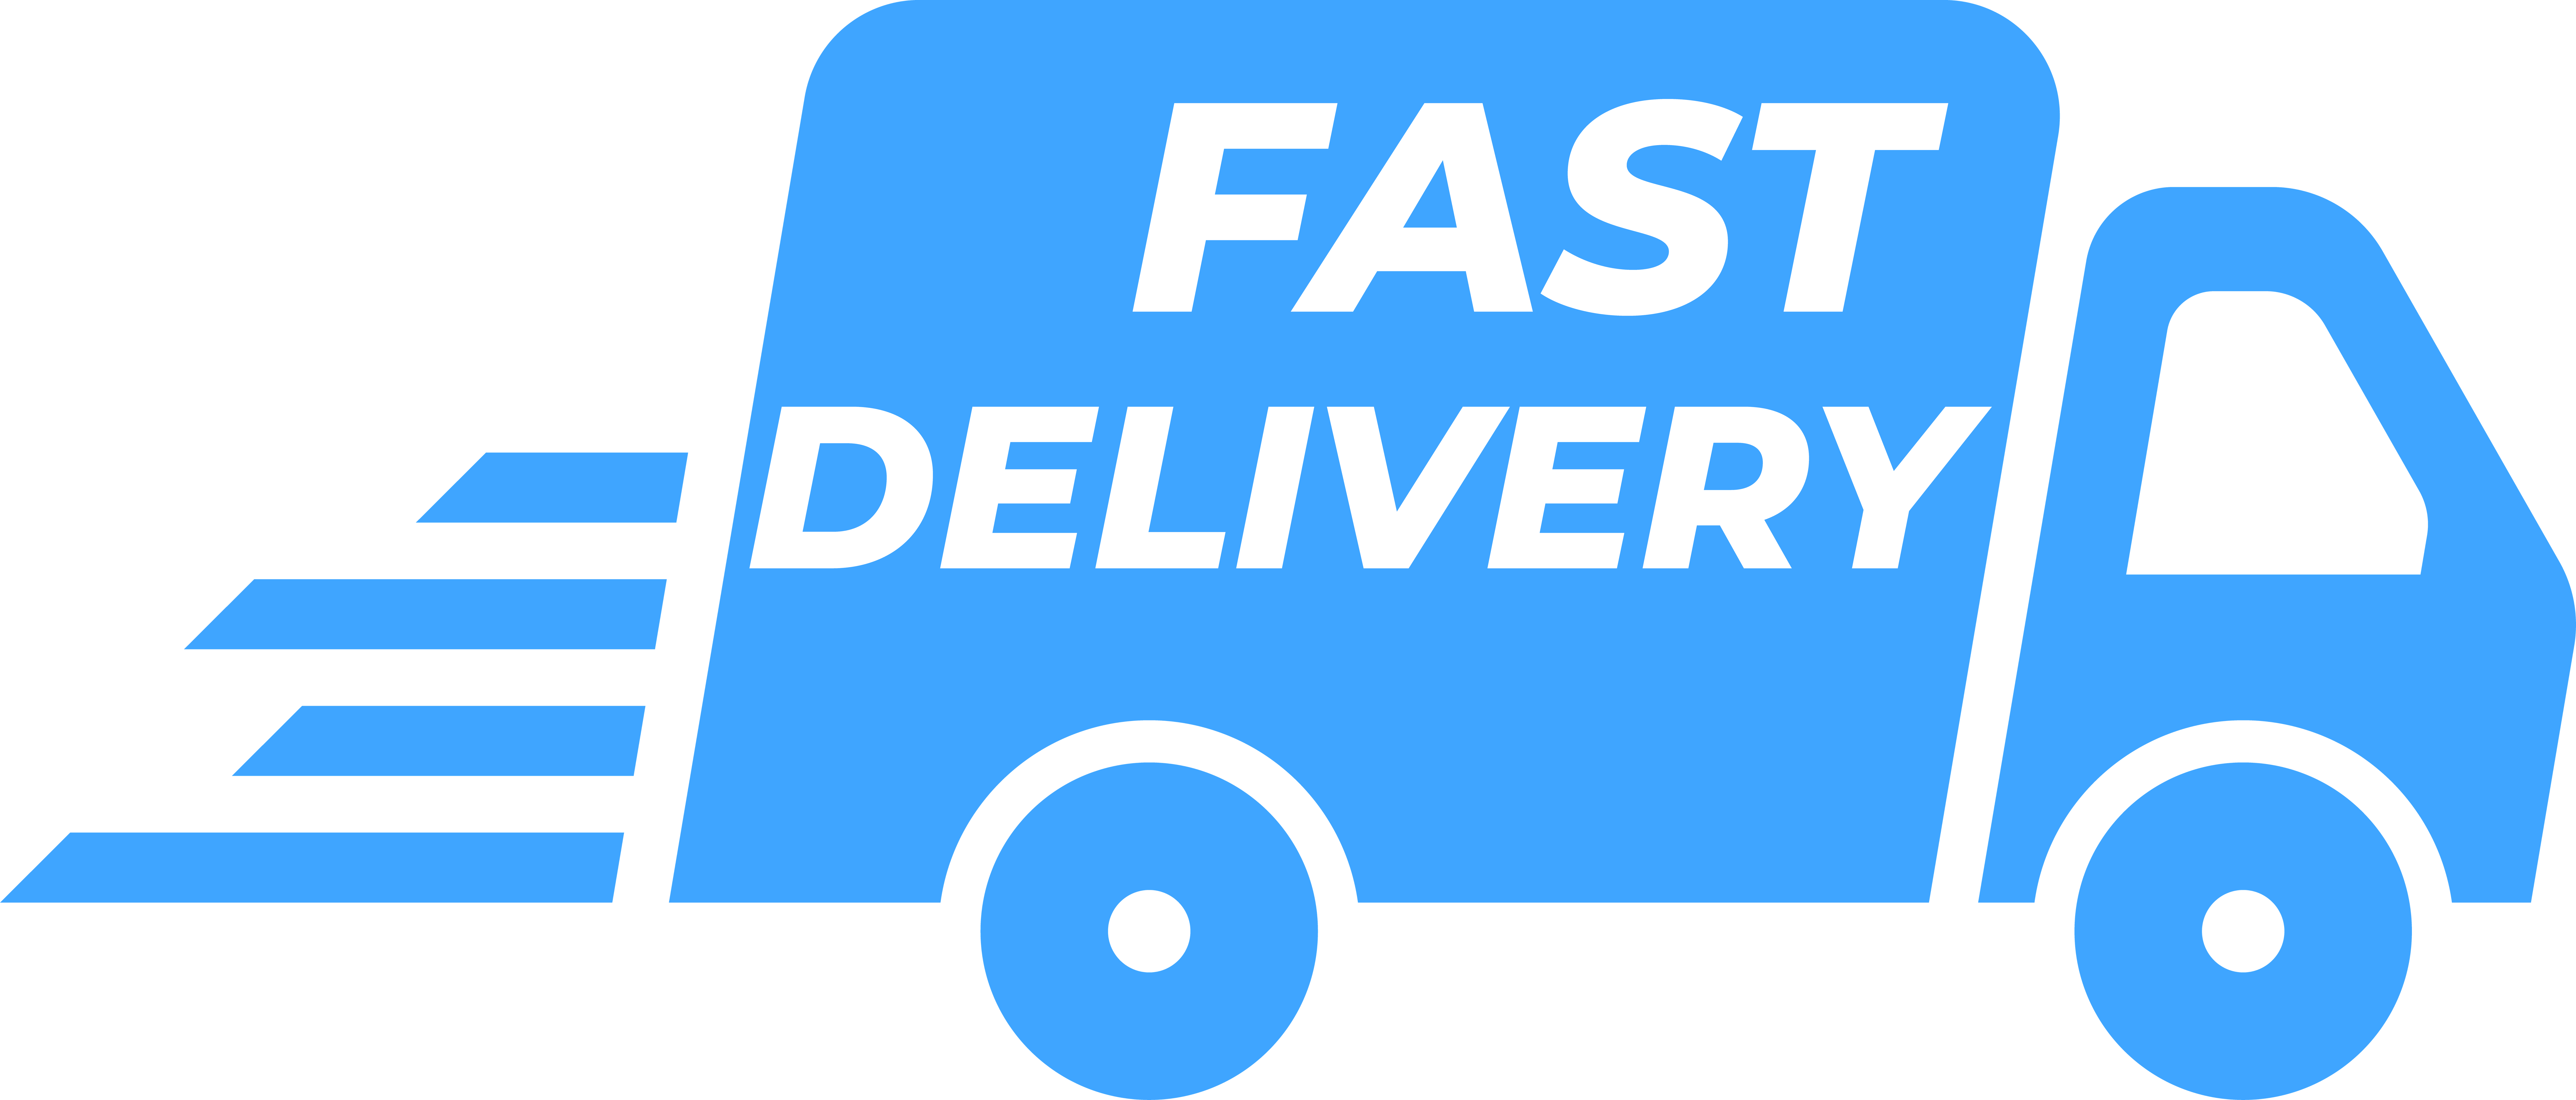 Fast delivery 